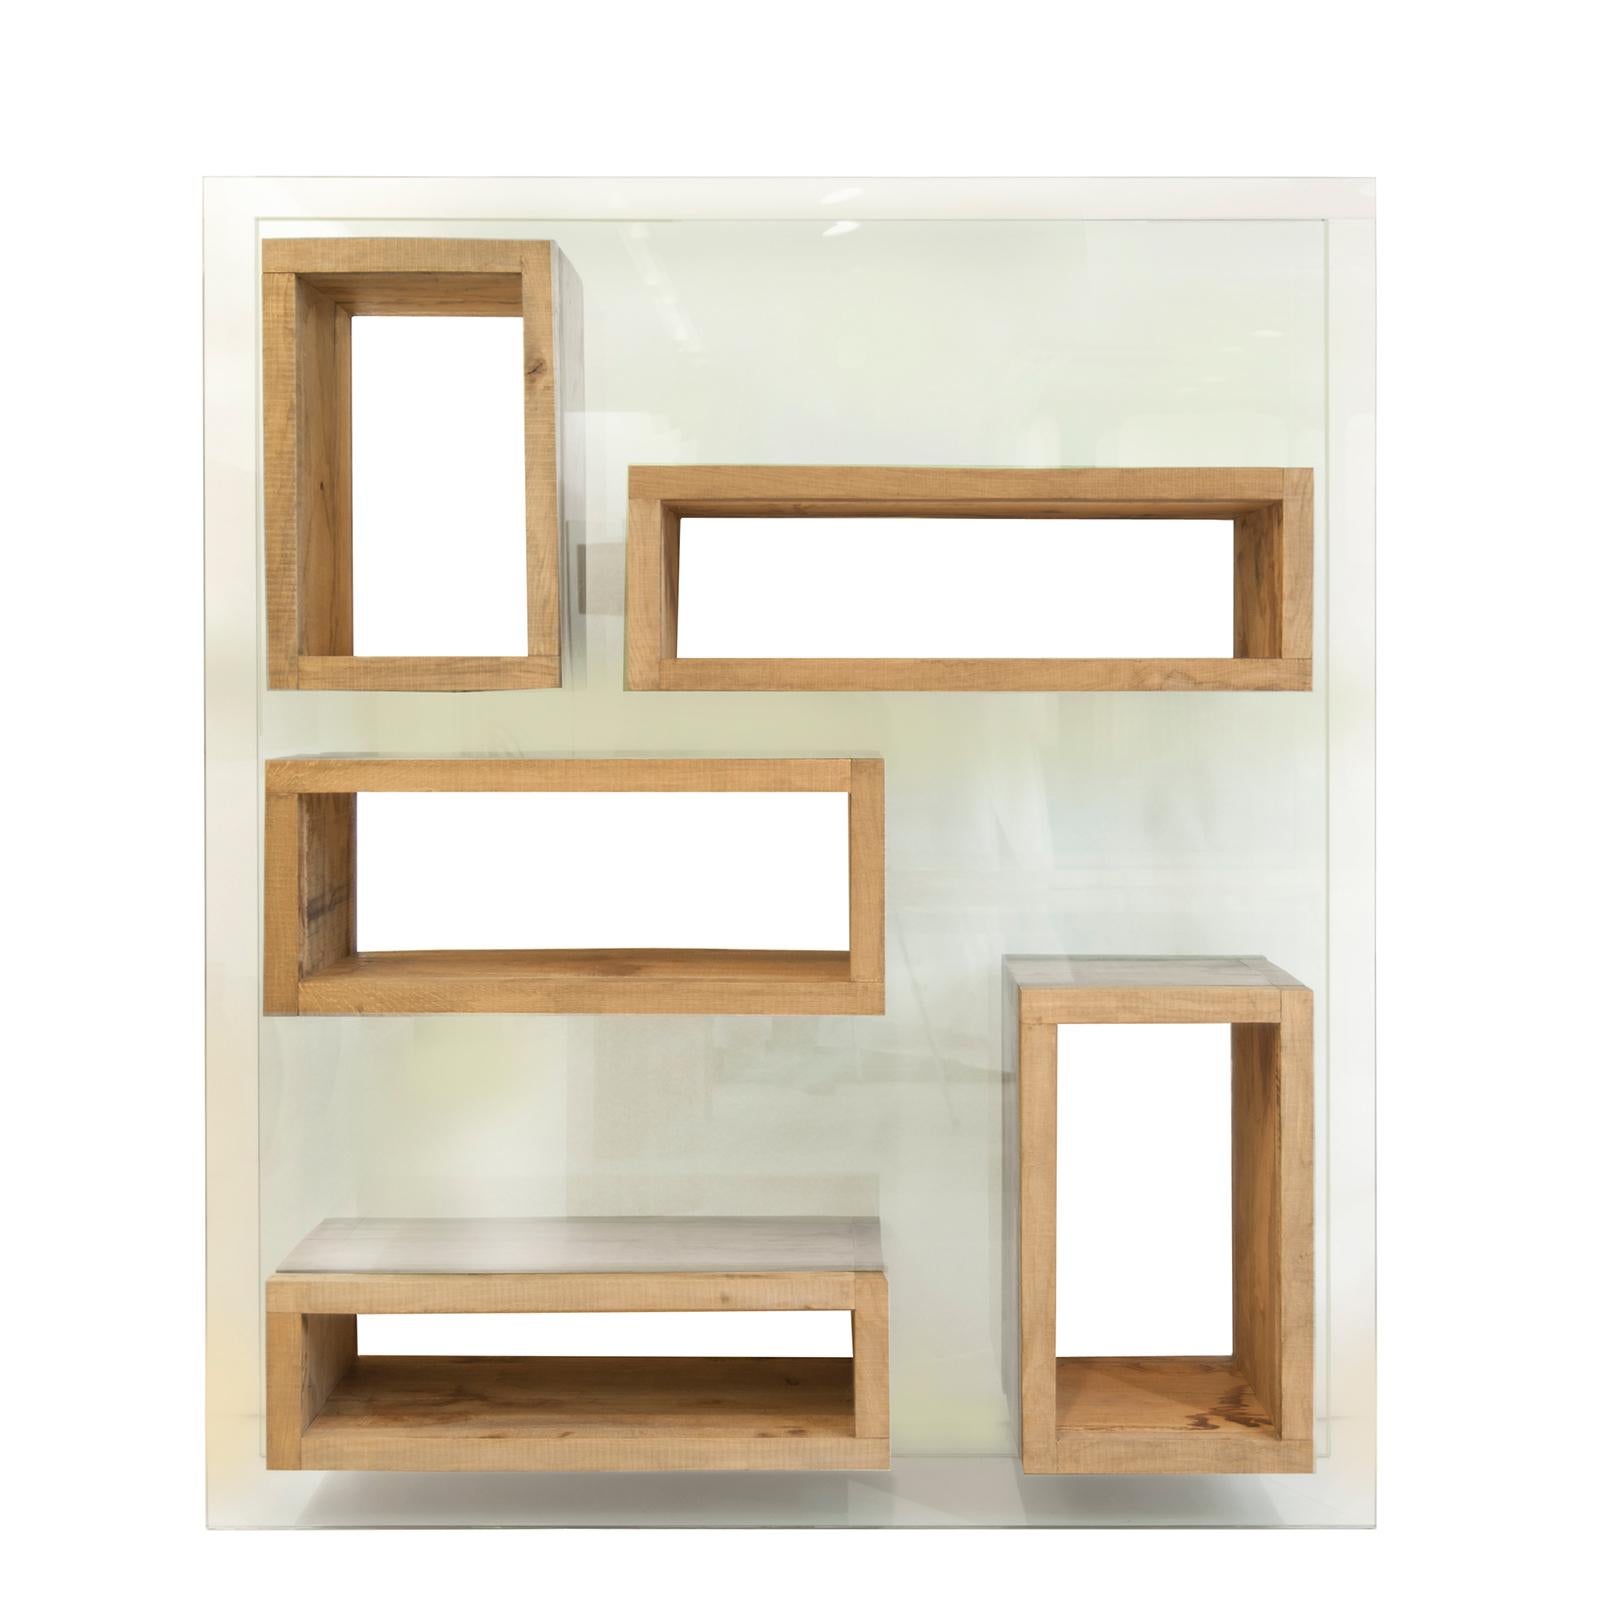 Designed by Matteo Casalegno

“Volumi Sospesi” is a beautiful bookcase made in antique wood and glass. It has pure and minimal, geometrical forms and can be used in 2 dimensions: in front and from a side.

Available in different size.